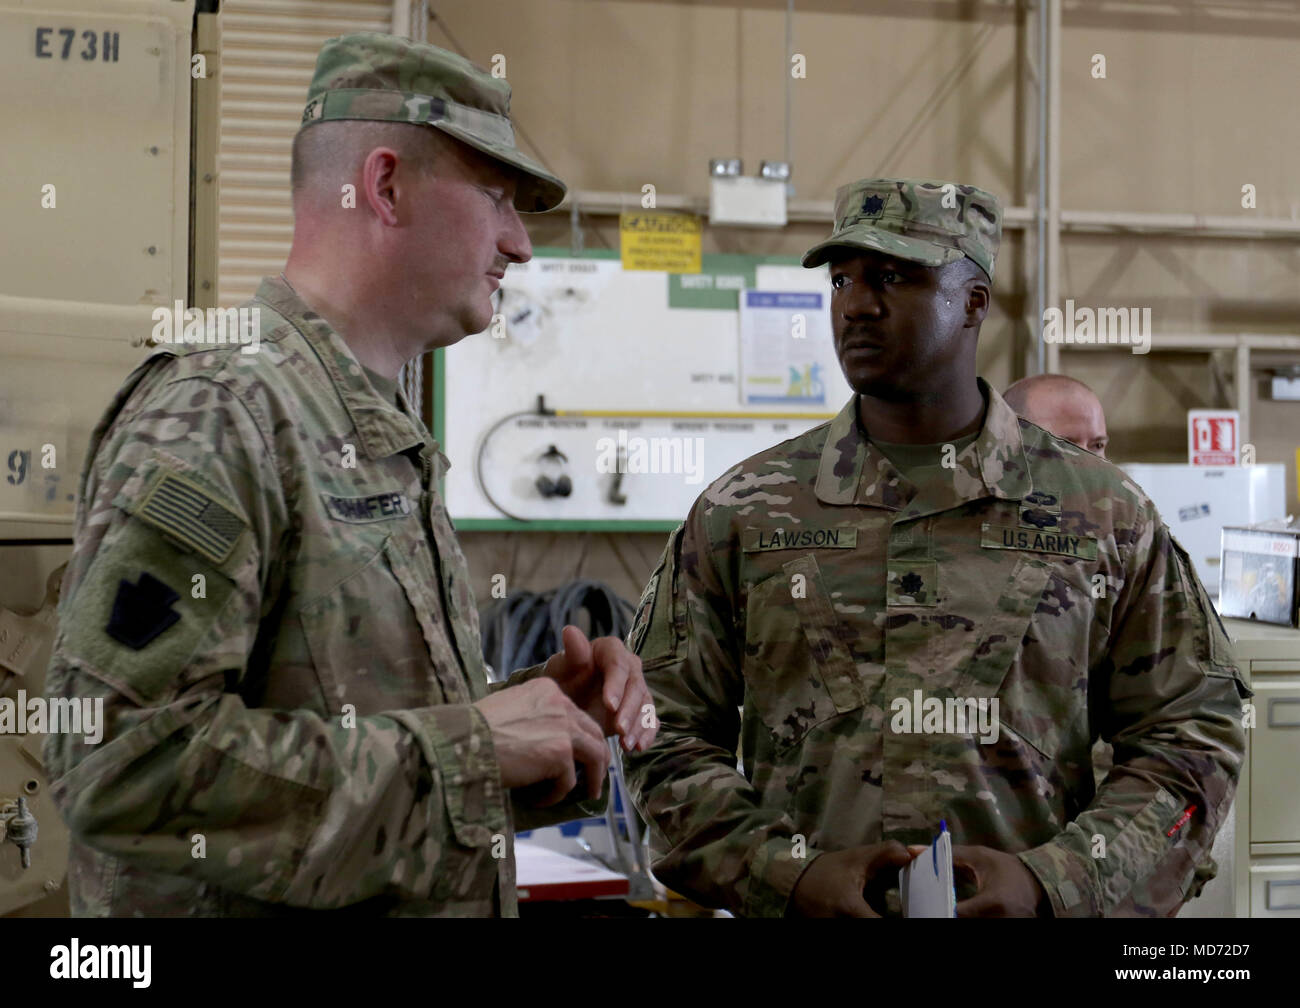 CAMP ARIFJAN, Kuwait – Maj. Gen. Andrew Schafer (left), commanding general of the 28th Infantry Division and Task Force Spartan, talks with Lt. Col. Ayo Lawson, commander of the 1st Battalion, 62nd Air Defense Artillery (ADA) Regiment, 11th Air Defense Artillery Brigade, TF Spartan, during a visit to the ADA location on March 21, 2018.  Lawson stressed his leadership ideals during Schafer’s time there. “I’m big on teamwork,” Lawson said.  “The key that we want at the end of the day is tactical and technical excellence.” (U.S. Army Photo by Staff Sgt. Matthew Keeler) Stock Photo